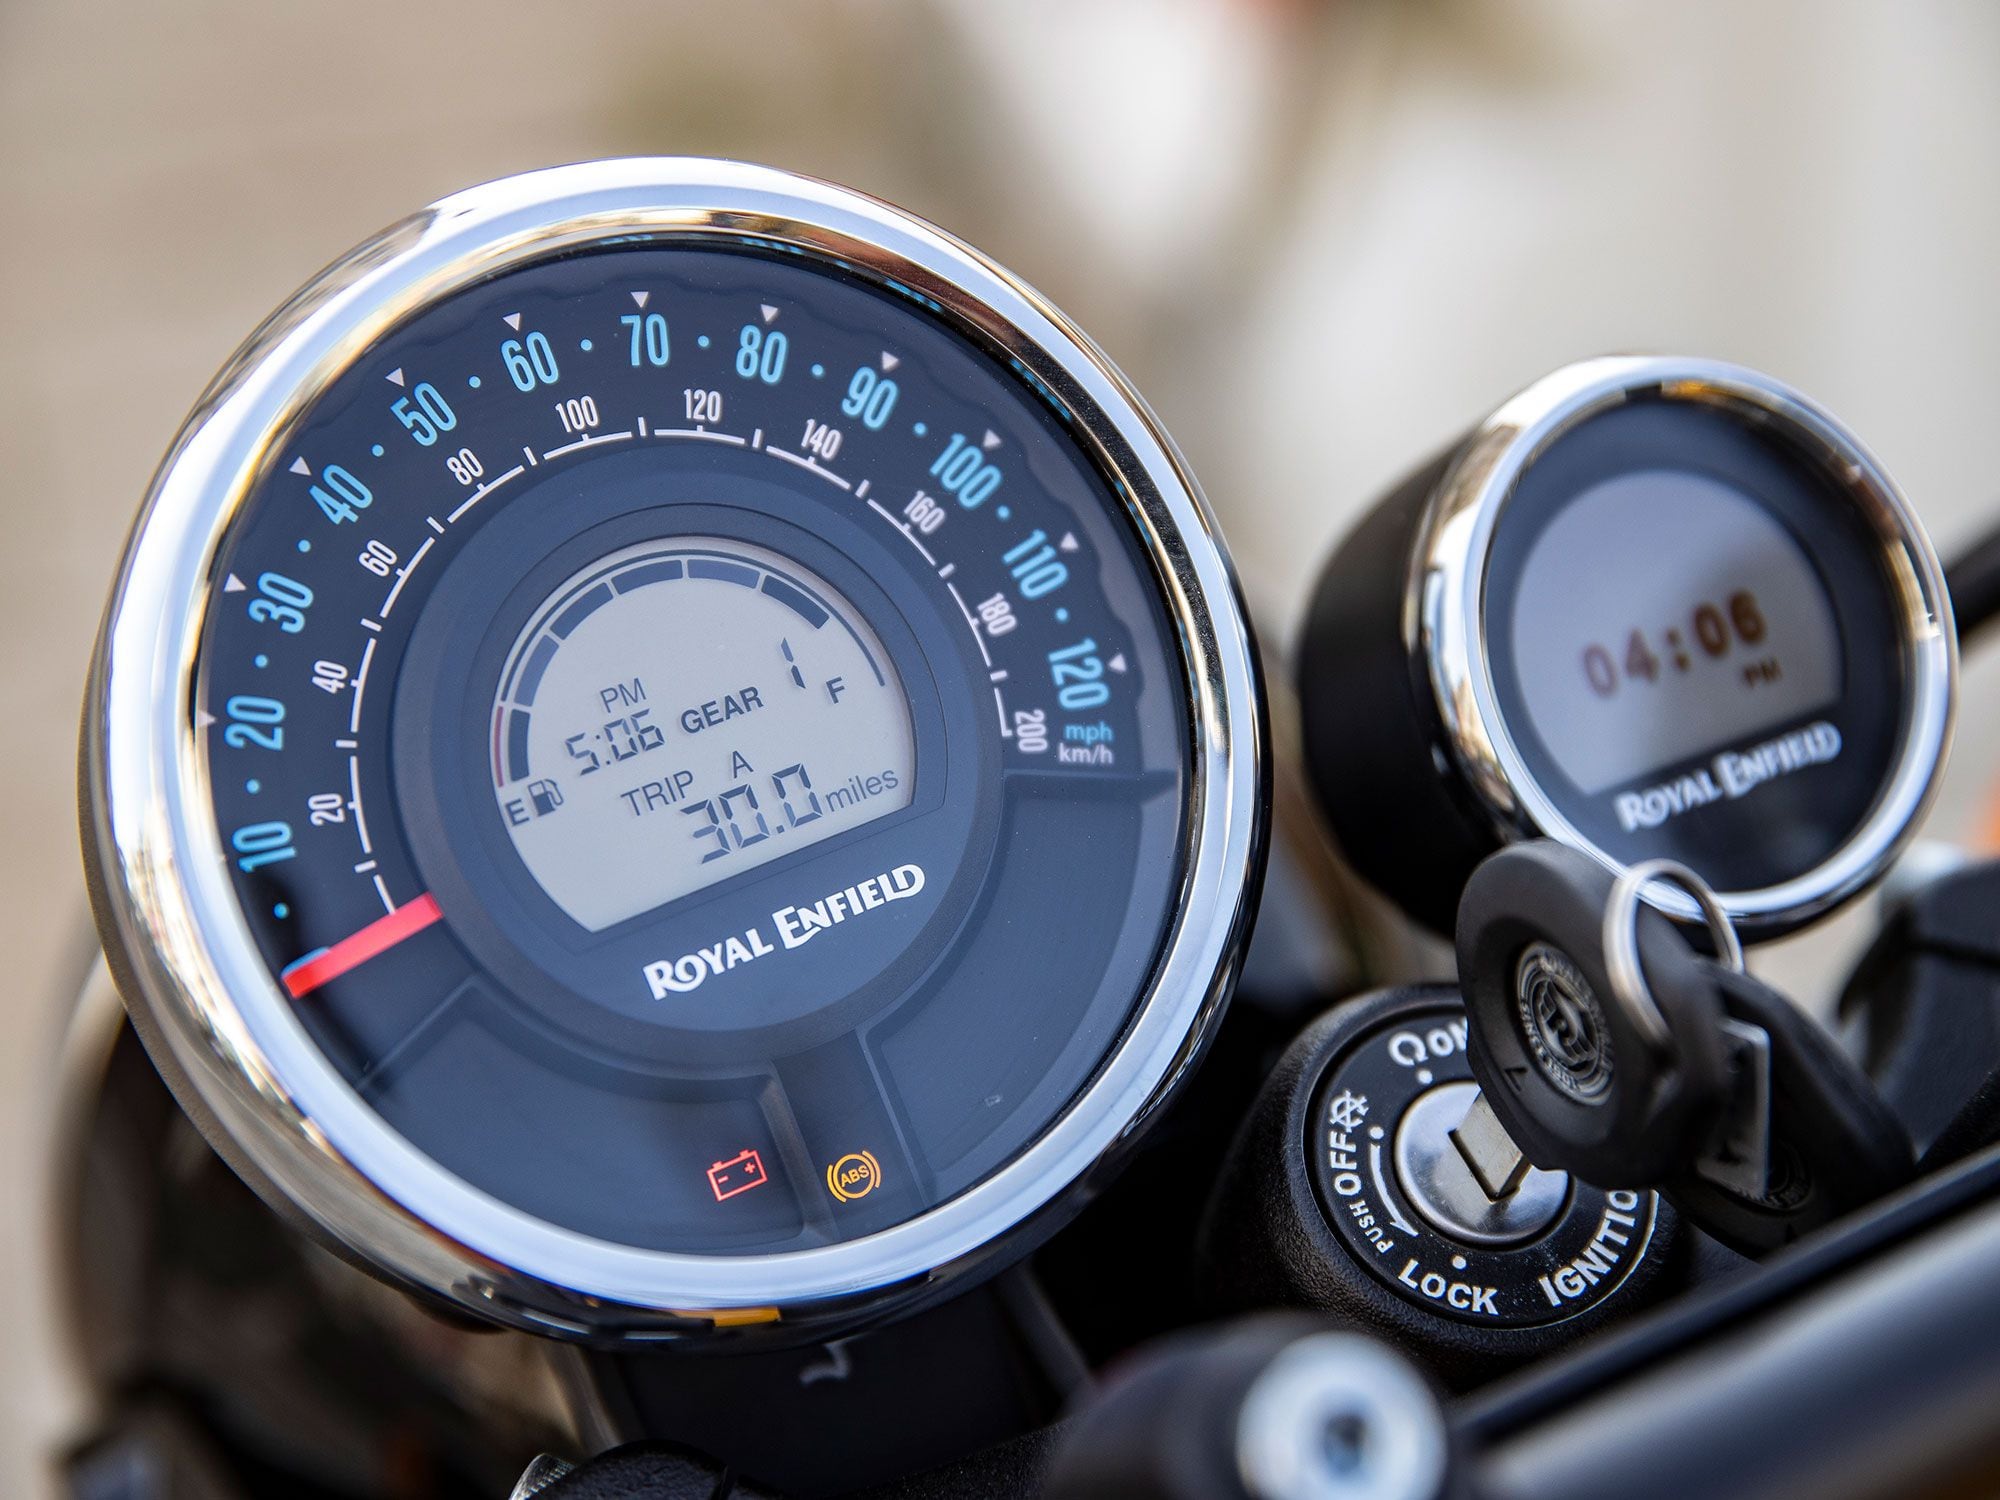 Typically riders would have to go to the aftermarket for navigation products for their motorcycles. With the Meteor 350, the Tripper Navigation system comes standard and displays on the gauge on the right.